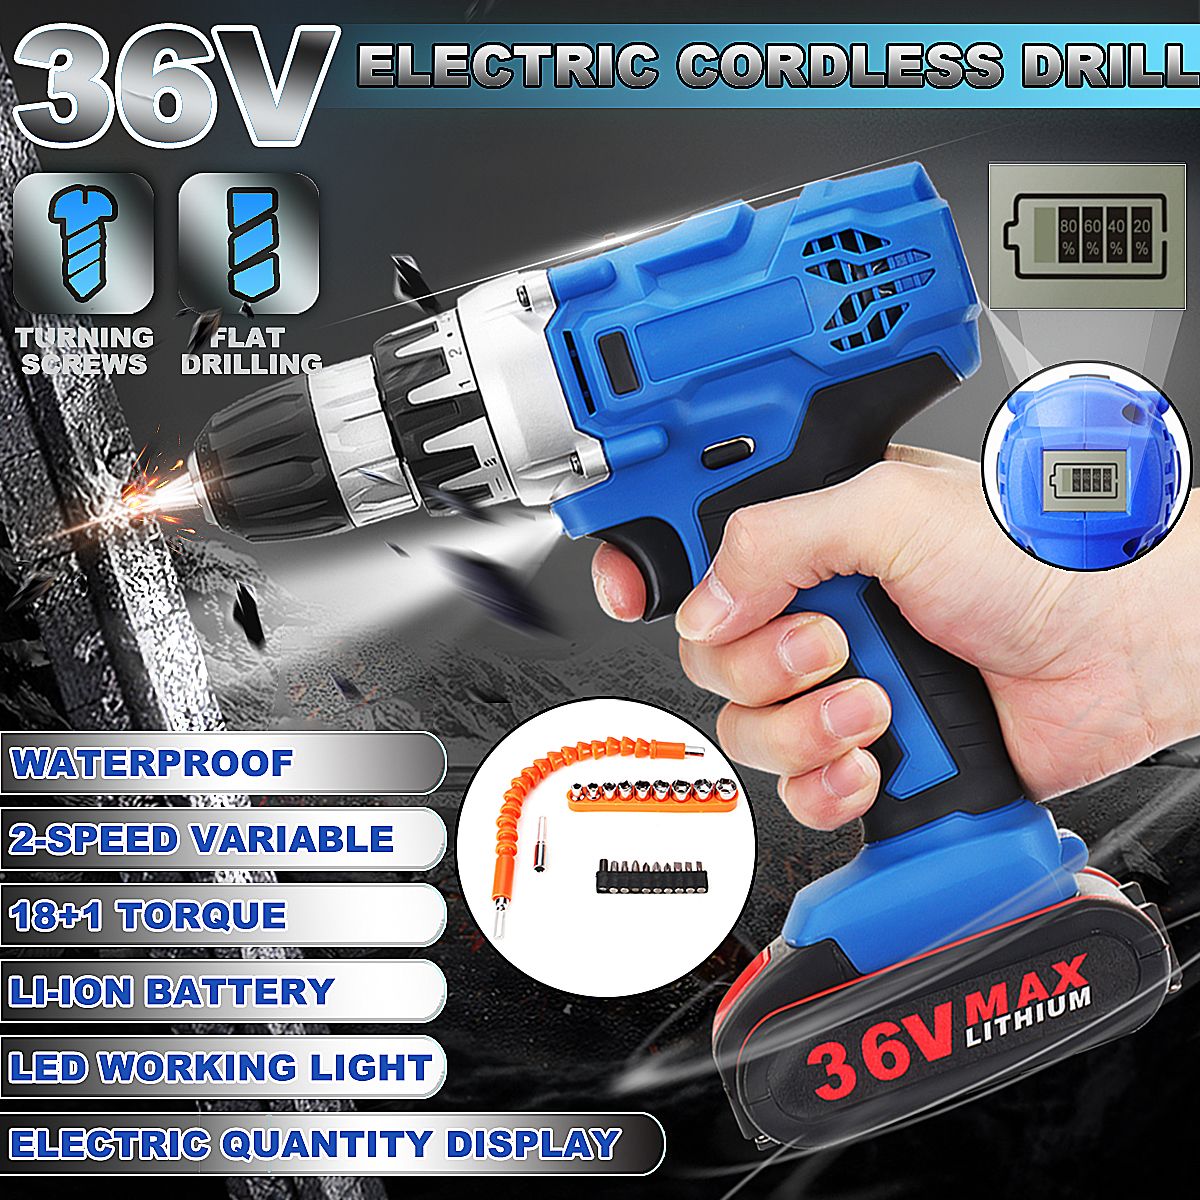 36V-Electric-Drill-Cordless-Power-Screwdriver-181-Torque-W-1-or-2-Li-ion-Battery-Power-Tools-Kit-1442750